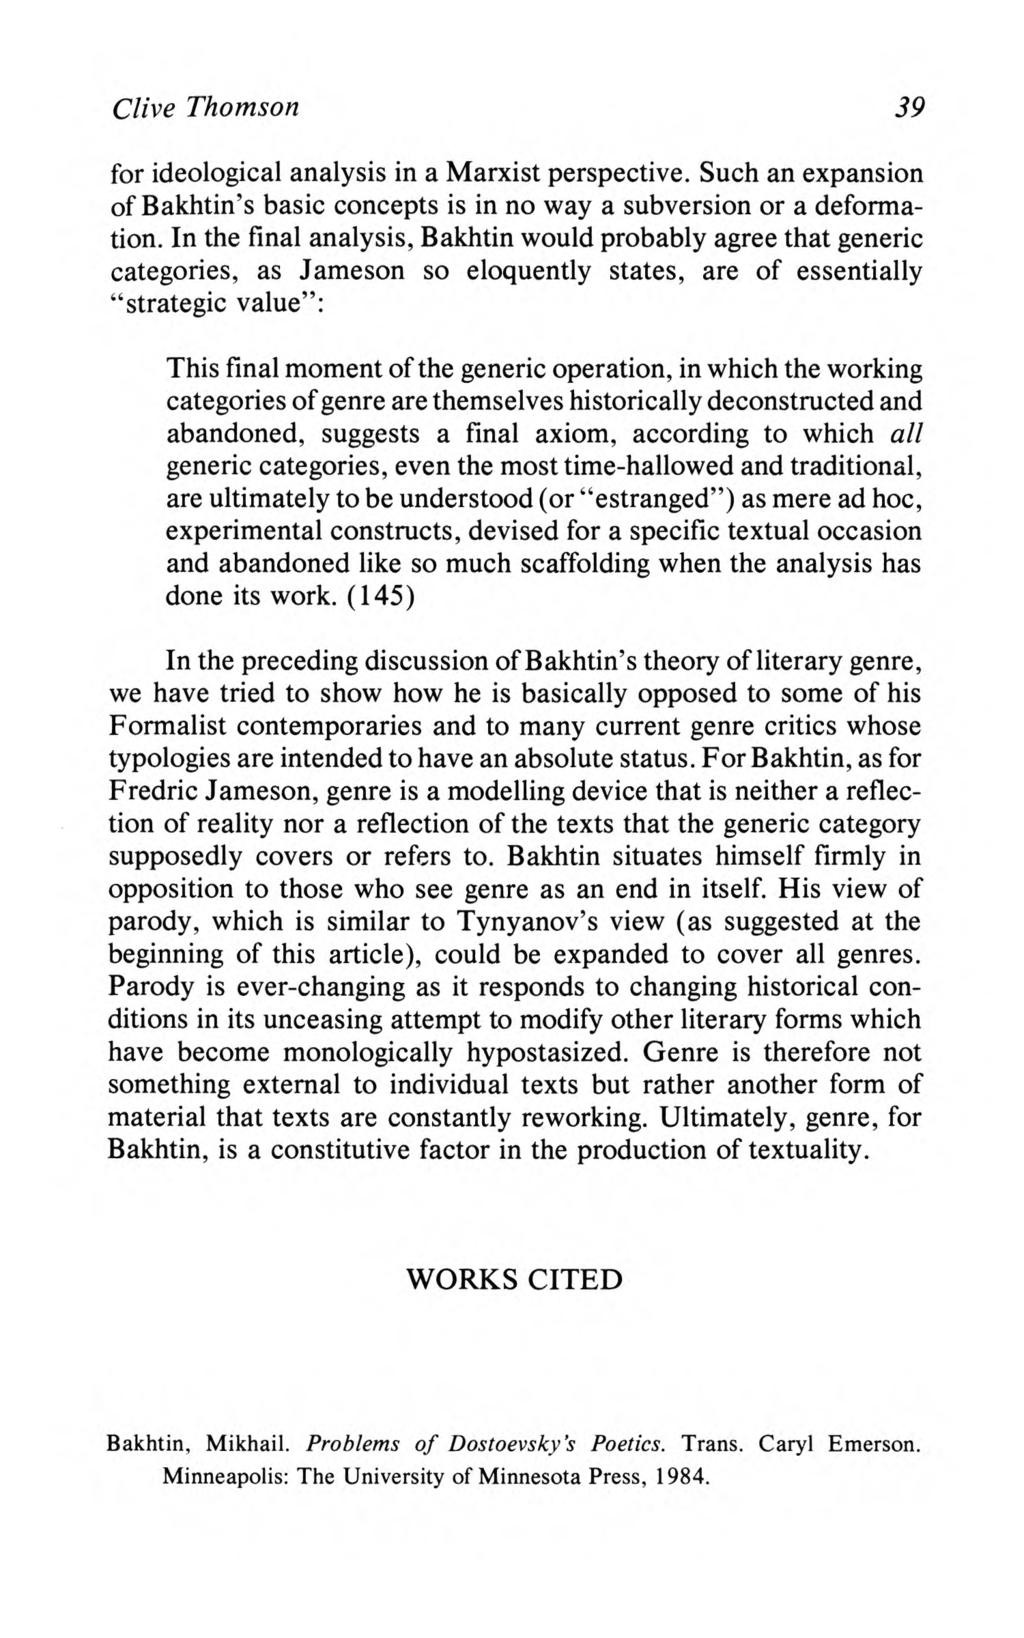 Thomson: Bakhtin's "Theory" of Genre Clive Thomson 39 for ideological analysis in a Marxist perspective. Such an expansion of Bakhtin's basic concepts is in no way a subversion or a deformation.